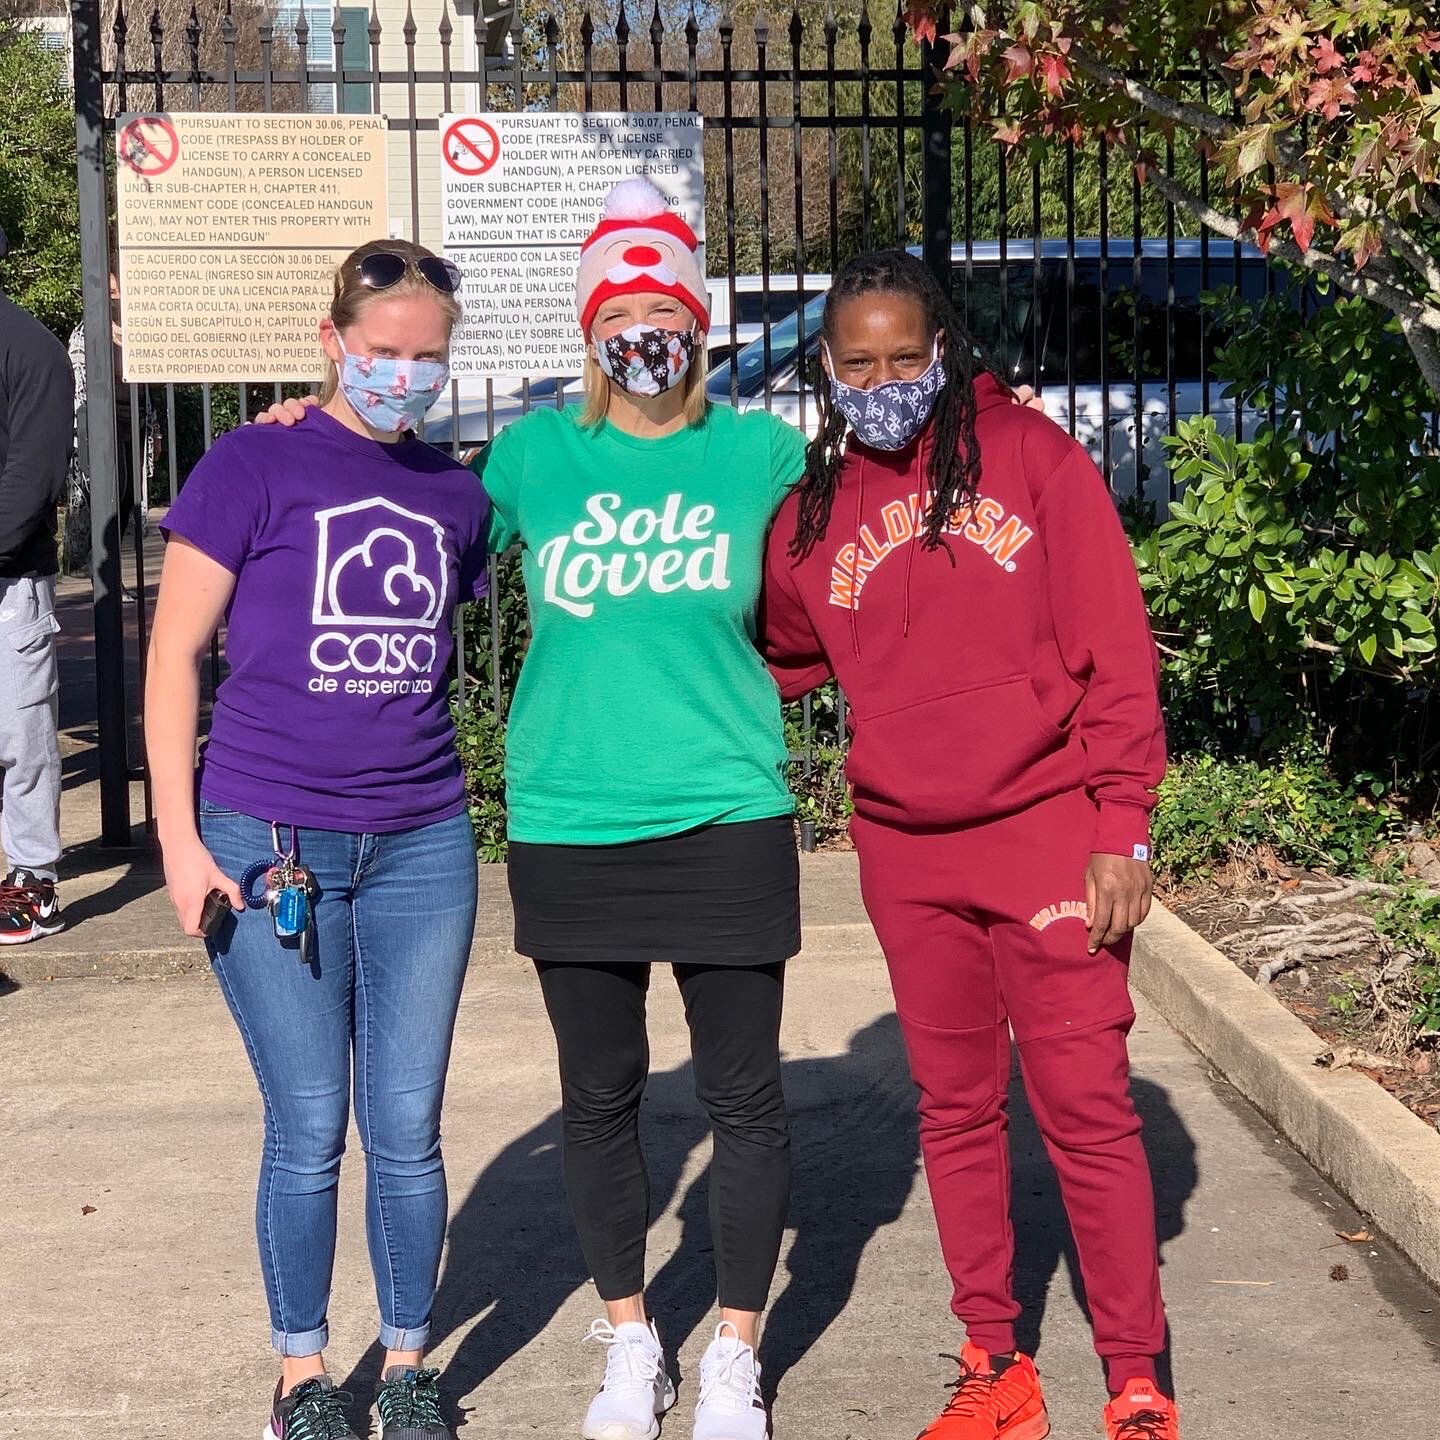 (l-r) Mikaela Fox from Casa de Esperanza, Stacy Bourgeois, Founder of Sole Loved and Sponsor of the Toy Drive, and Patrice Griffin of Patrice’s Kids